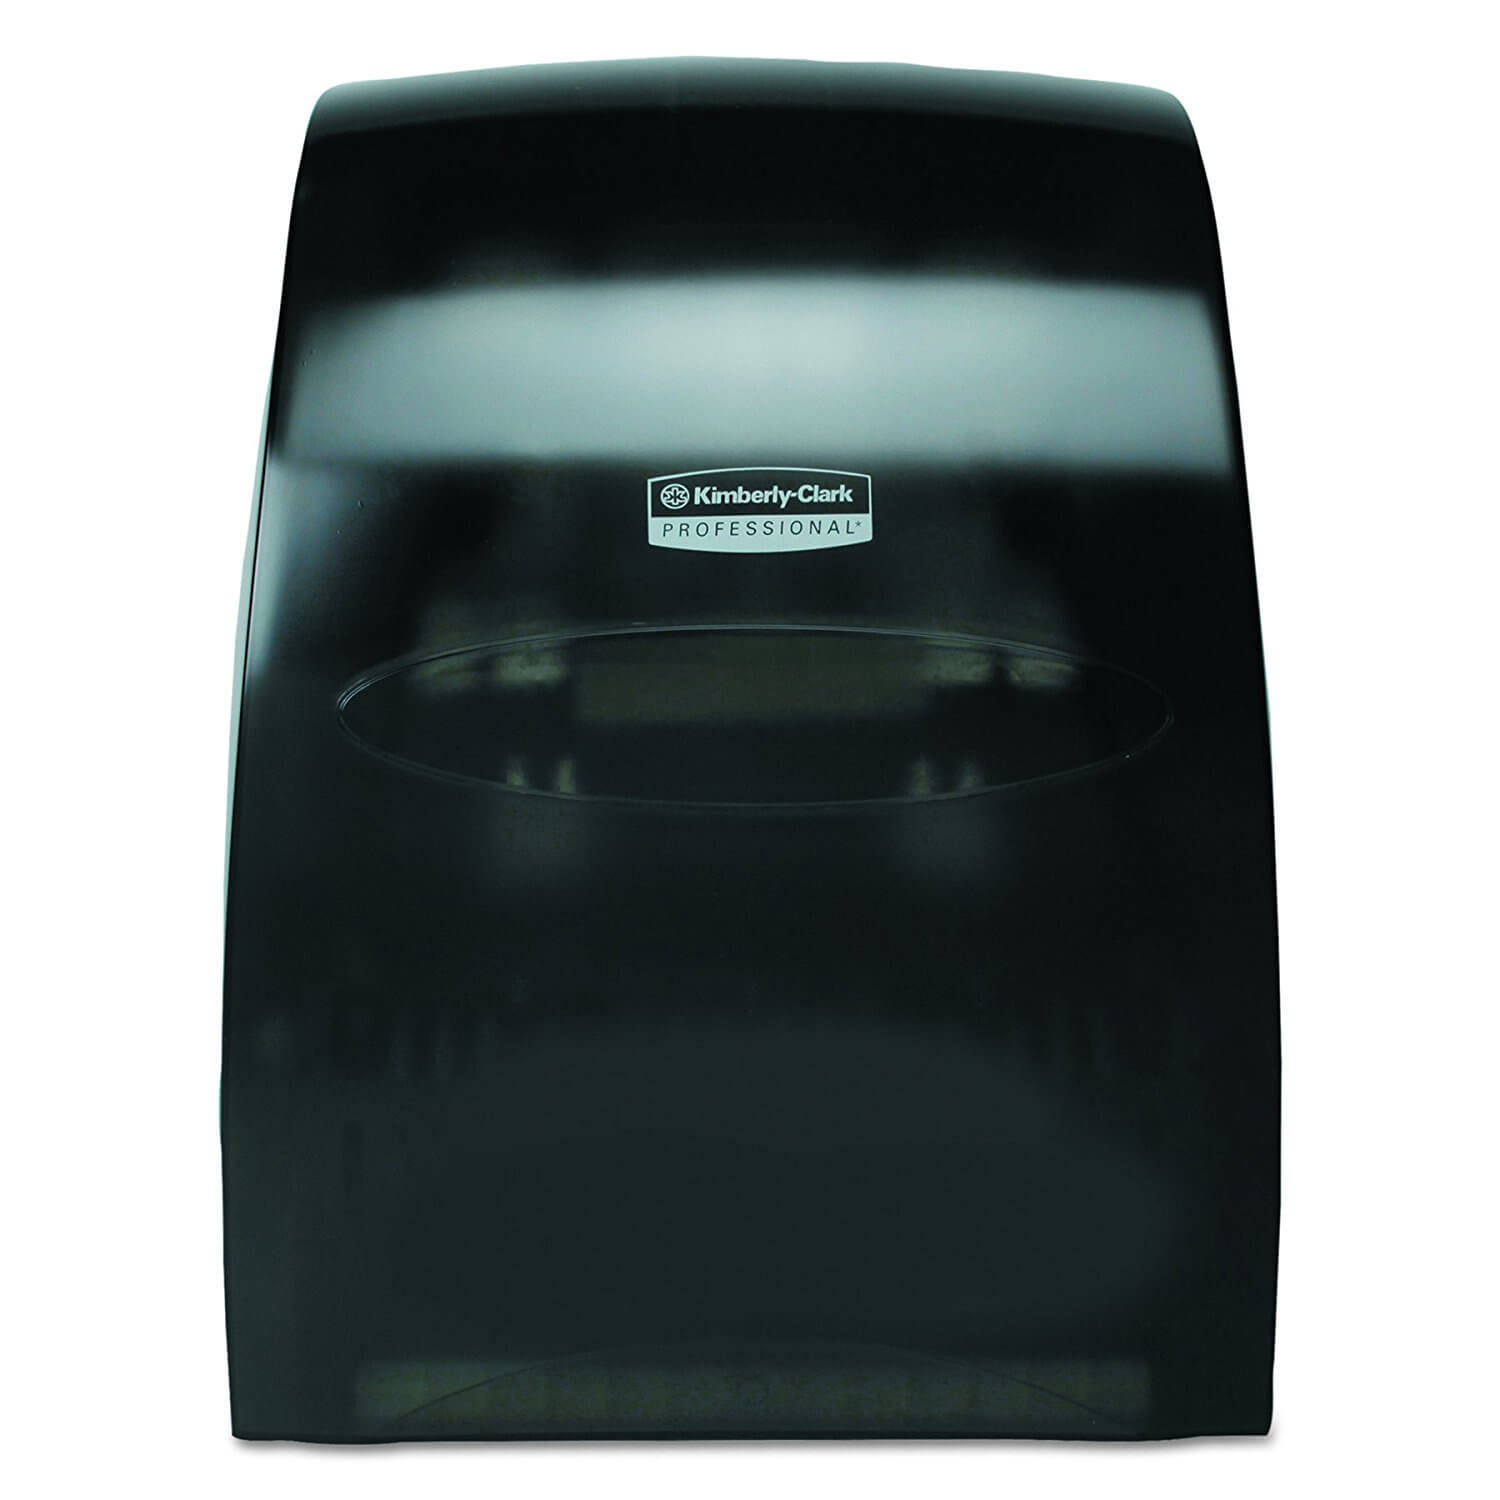 Kimberly-Clark Professional 09992 Touchless Towel Dispenser